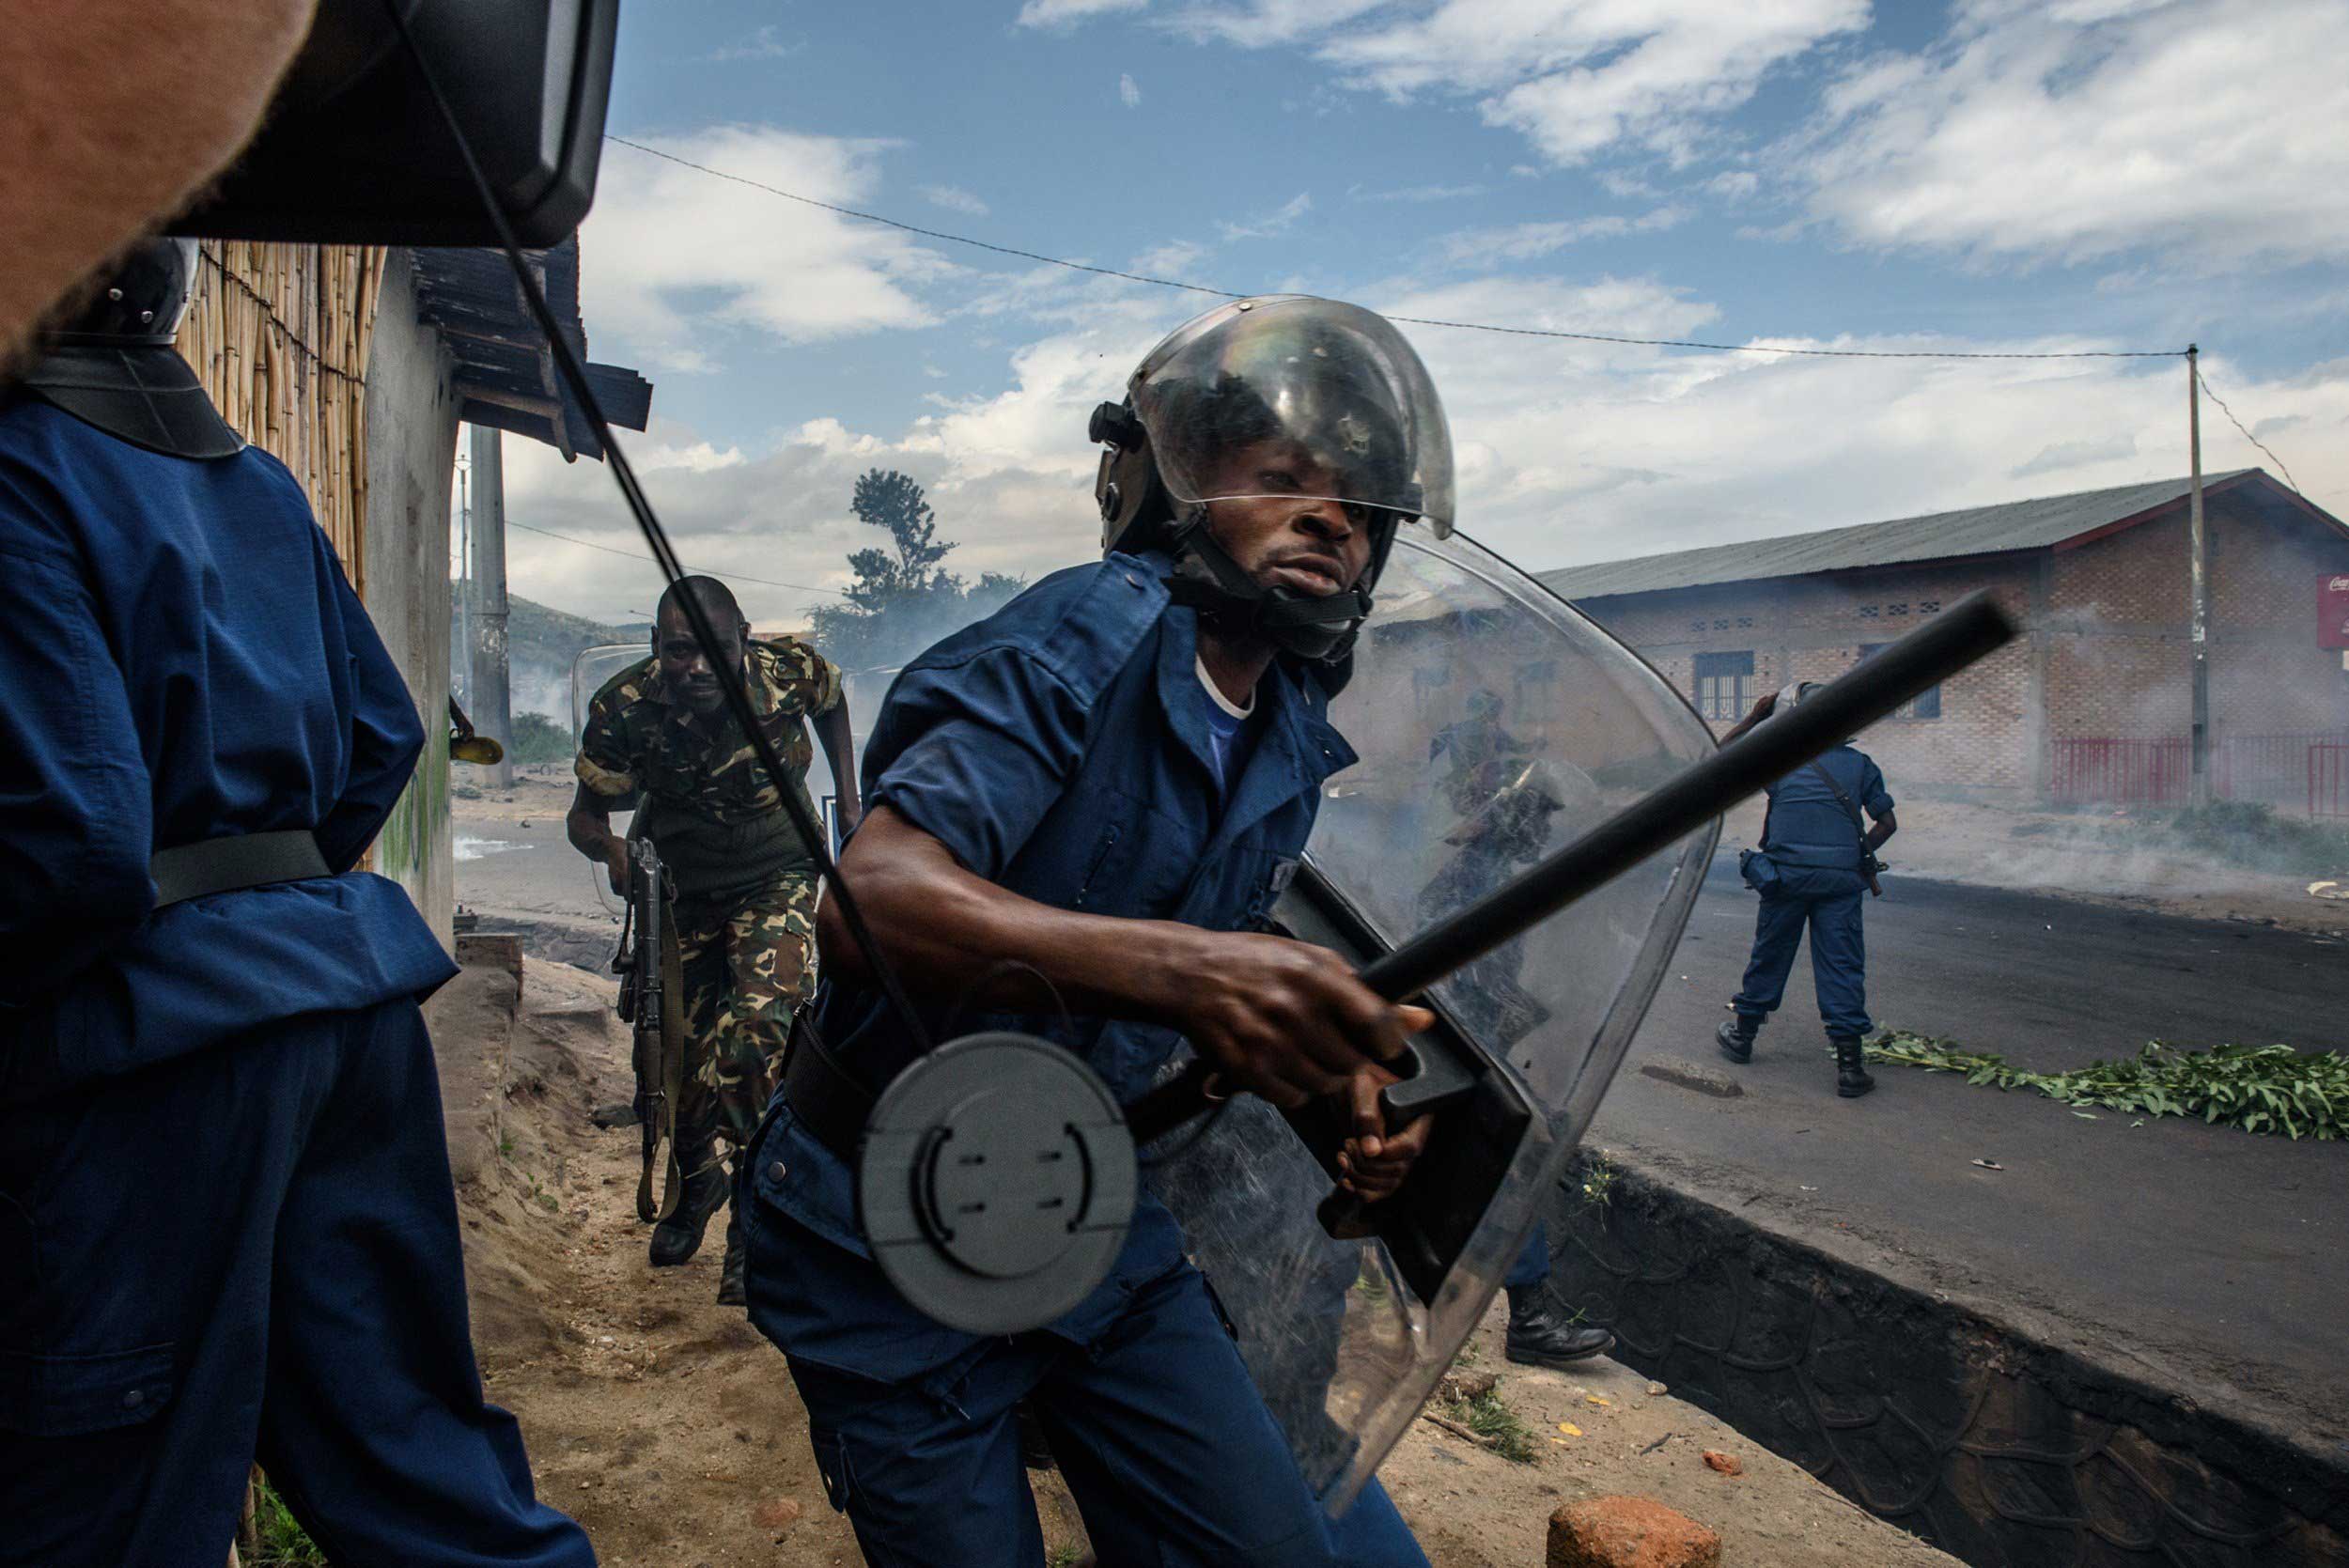 A police officer holding a baton and army forces run after protesters throwing stones during a demonstration against incumbent President Pierre Nkurunziza's bid for a third term in Bujumbura, Burundi, on May 13, 2015.